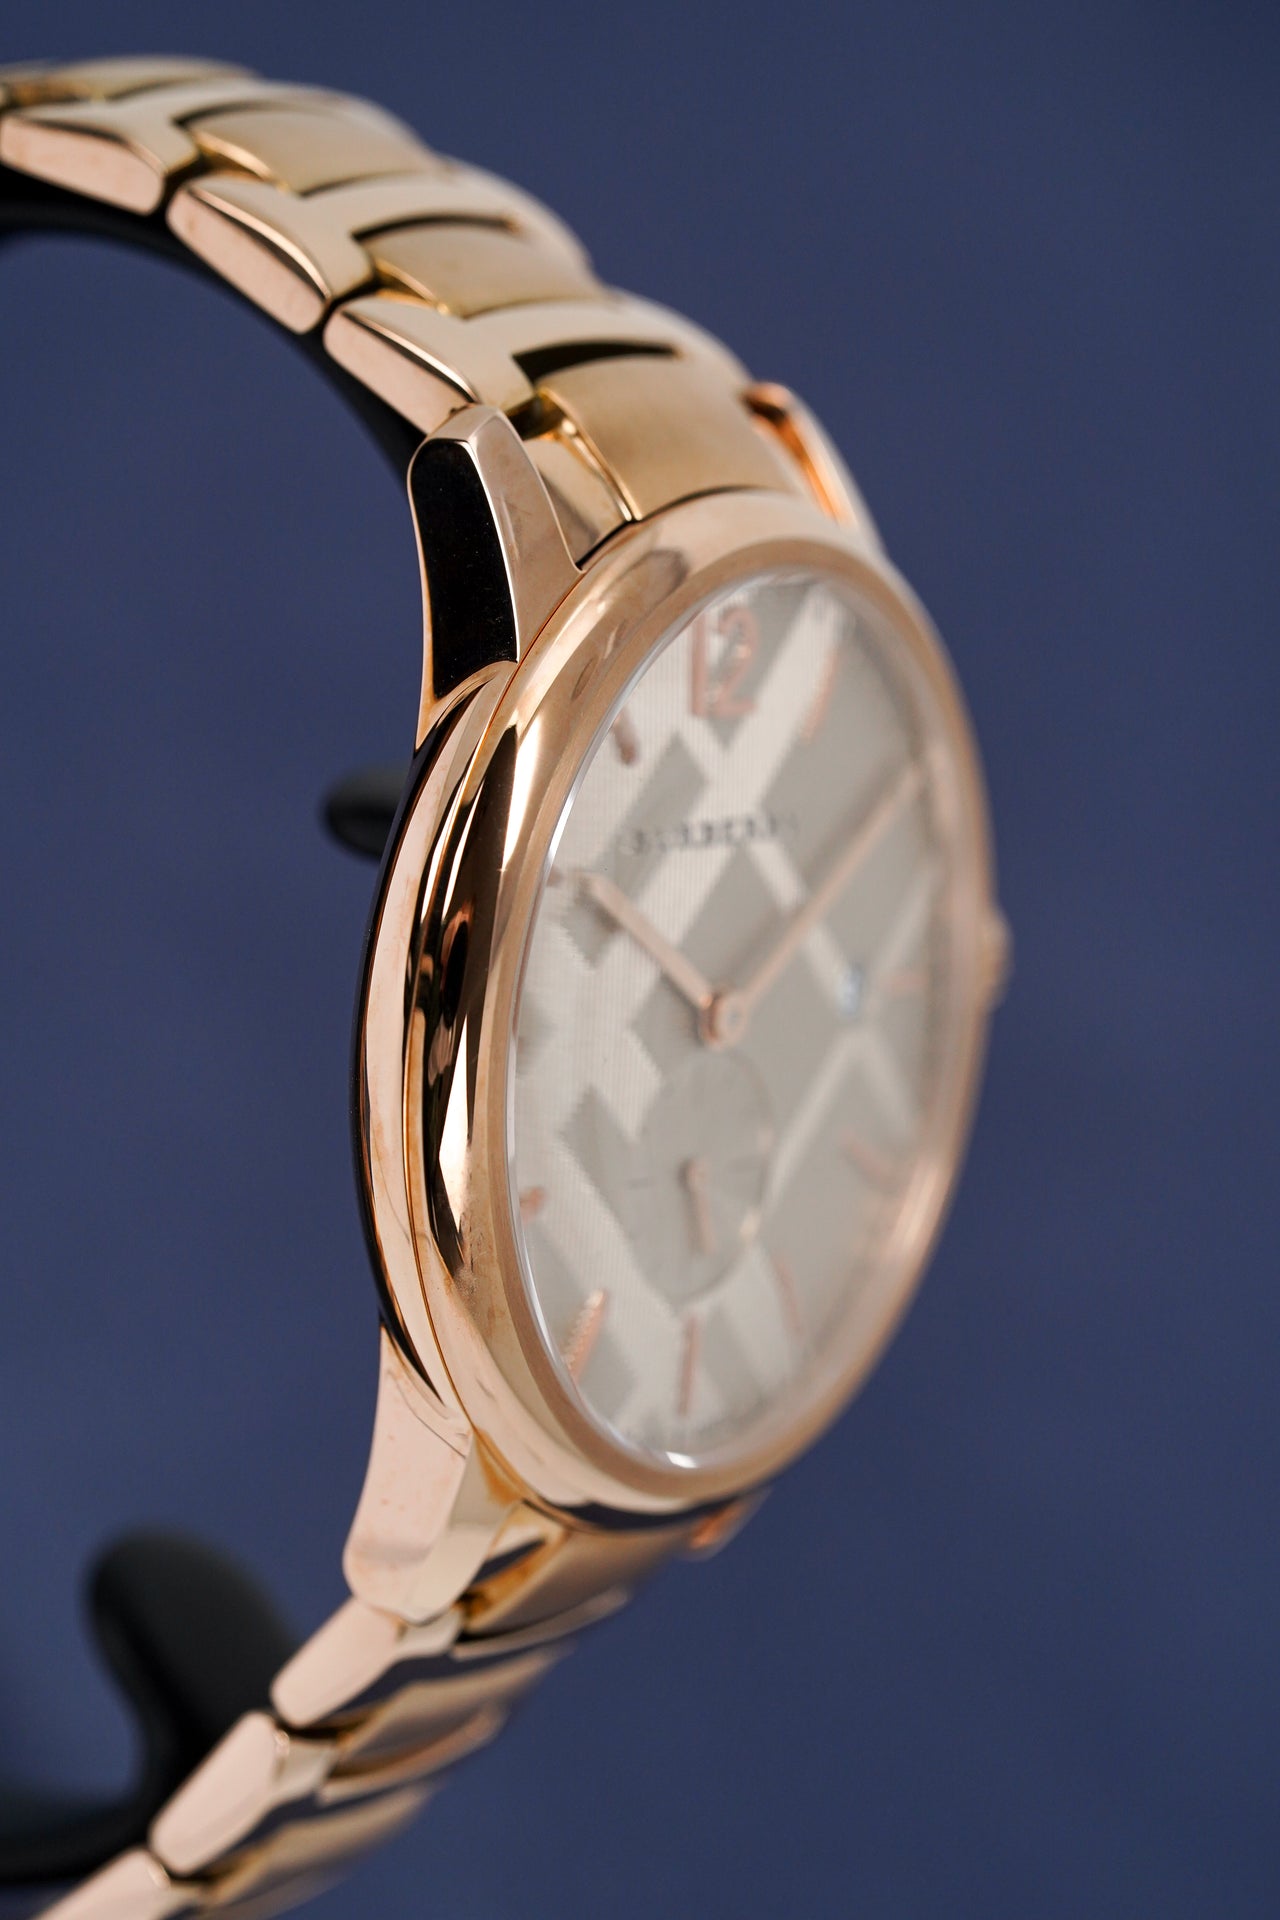 Best Prices on Burberry Watches in India